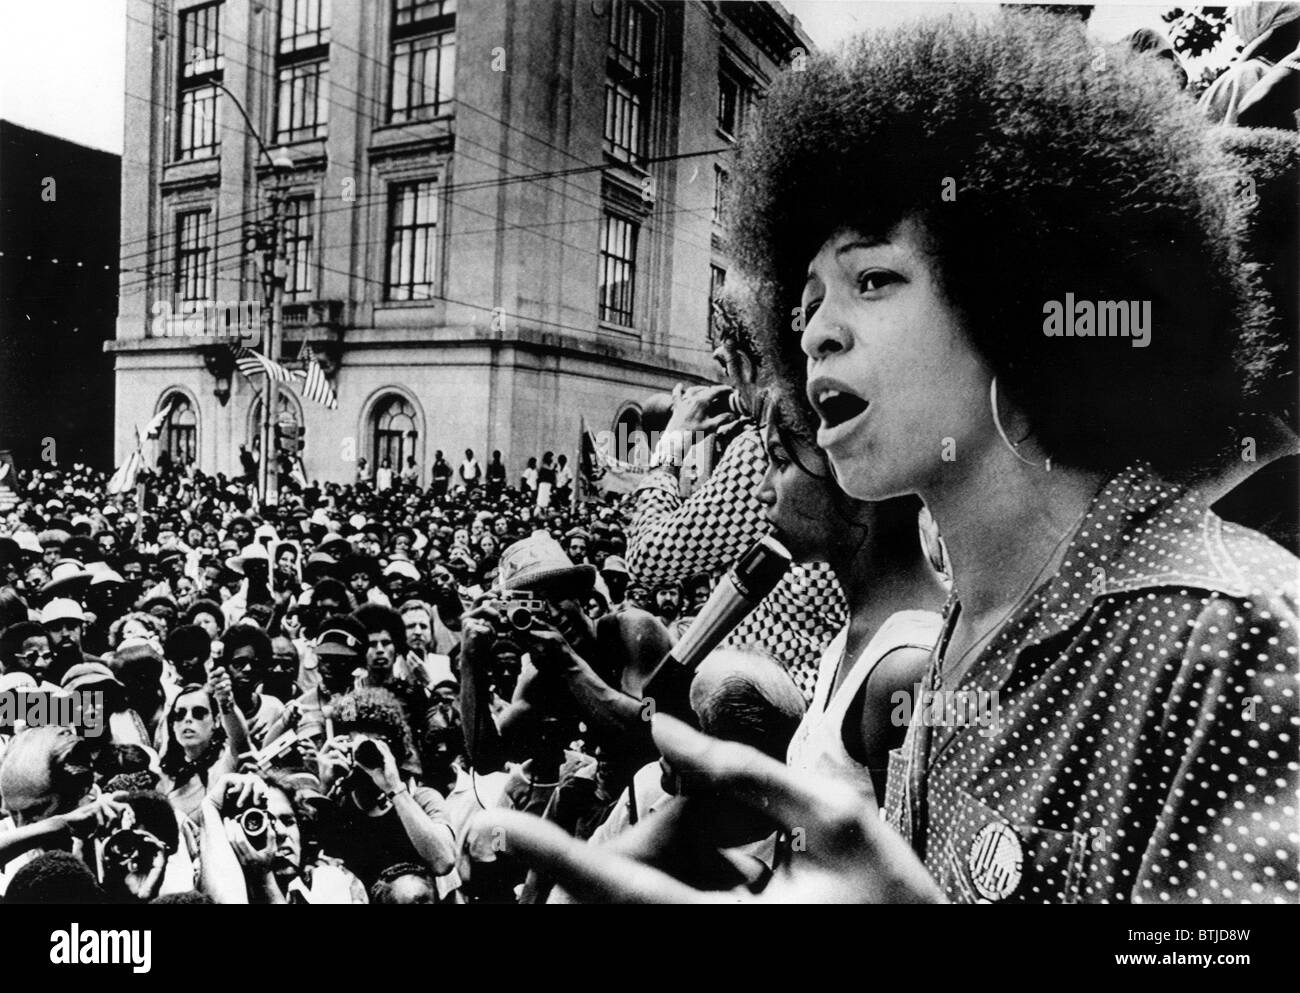 7/4/74--RALEIGH, N.C.: Black activist Angela Davis addresses a rally estimated at 5,000 people who marched through downtown Rale Stock Photo